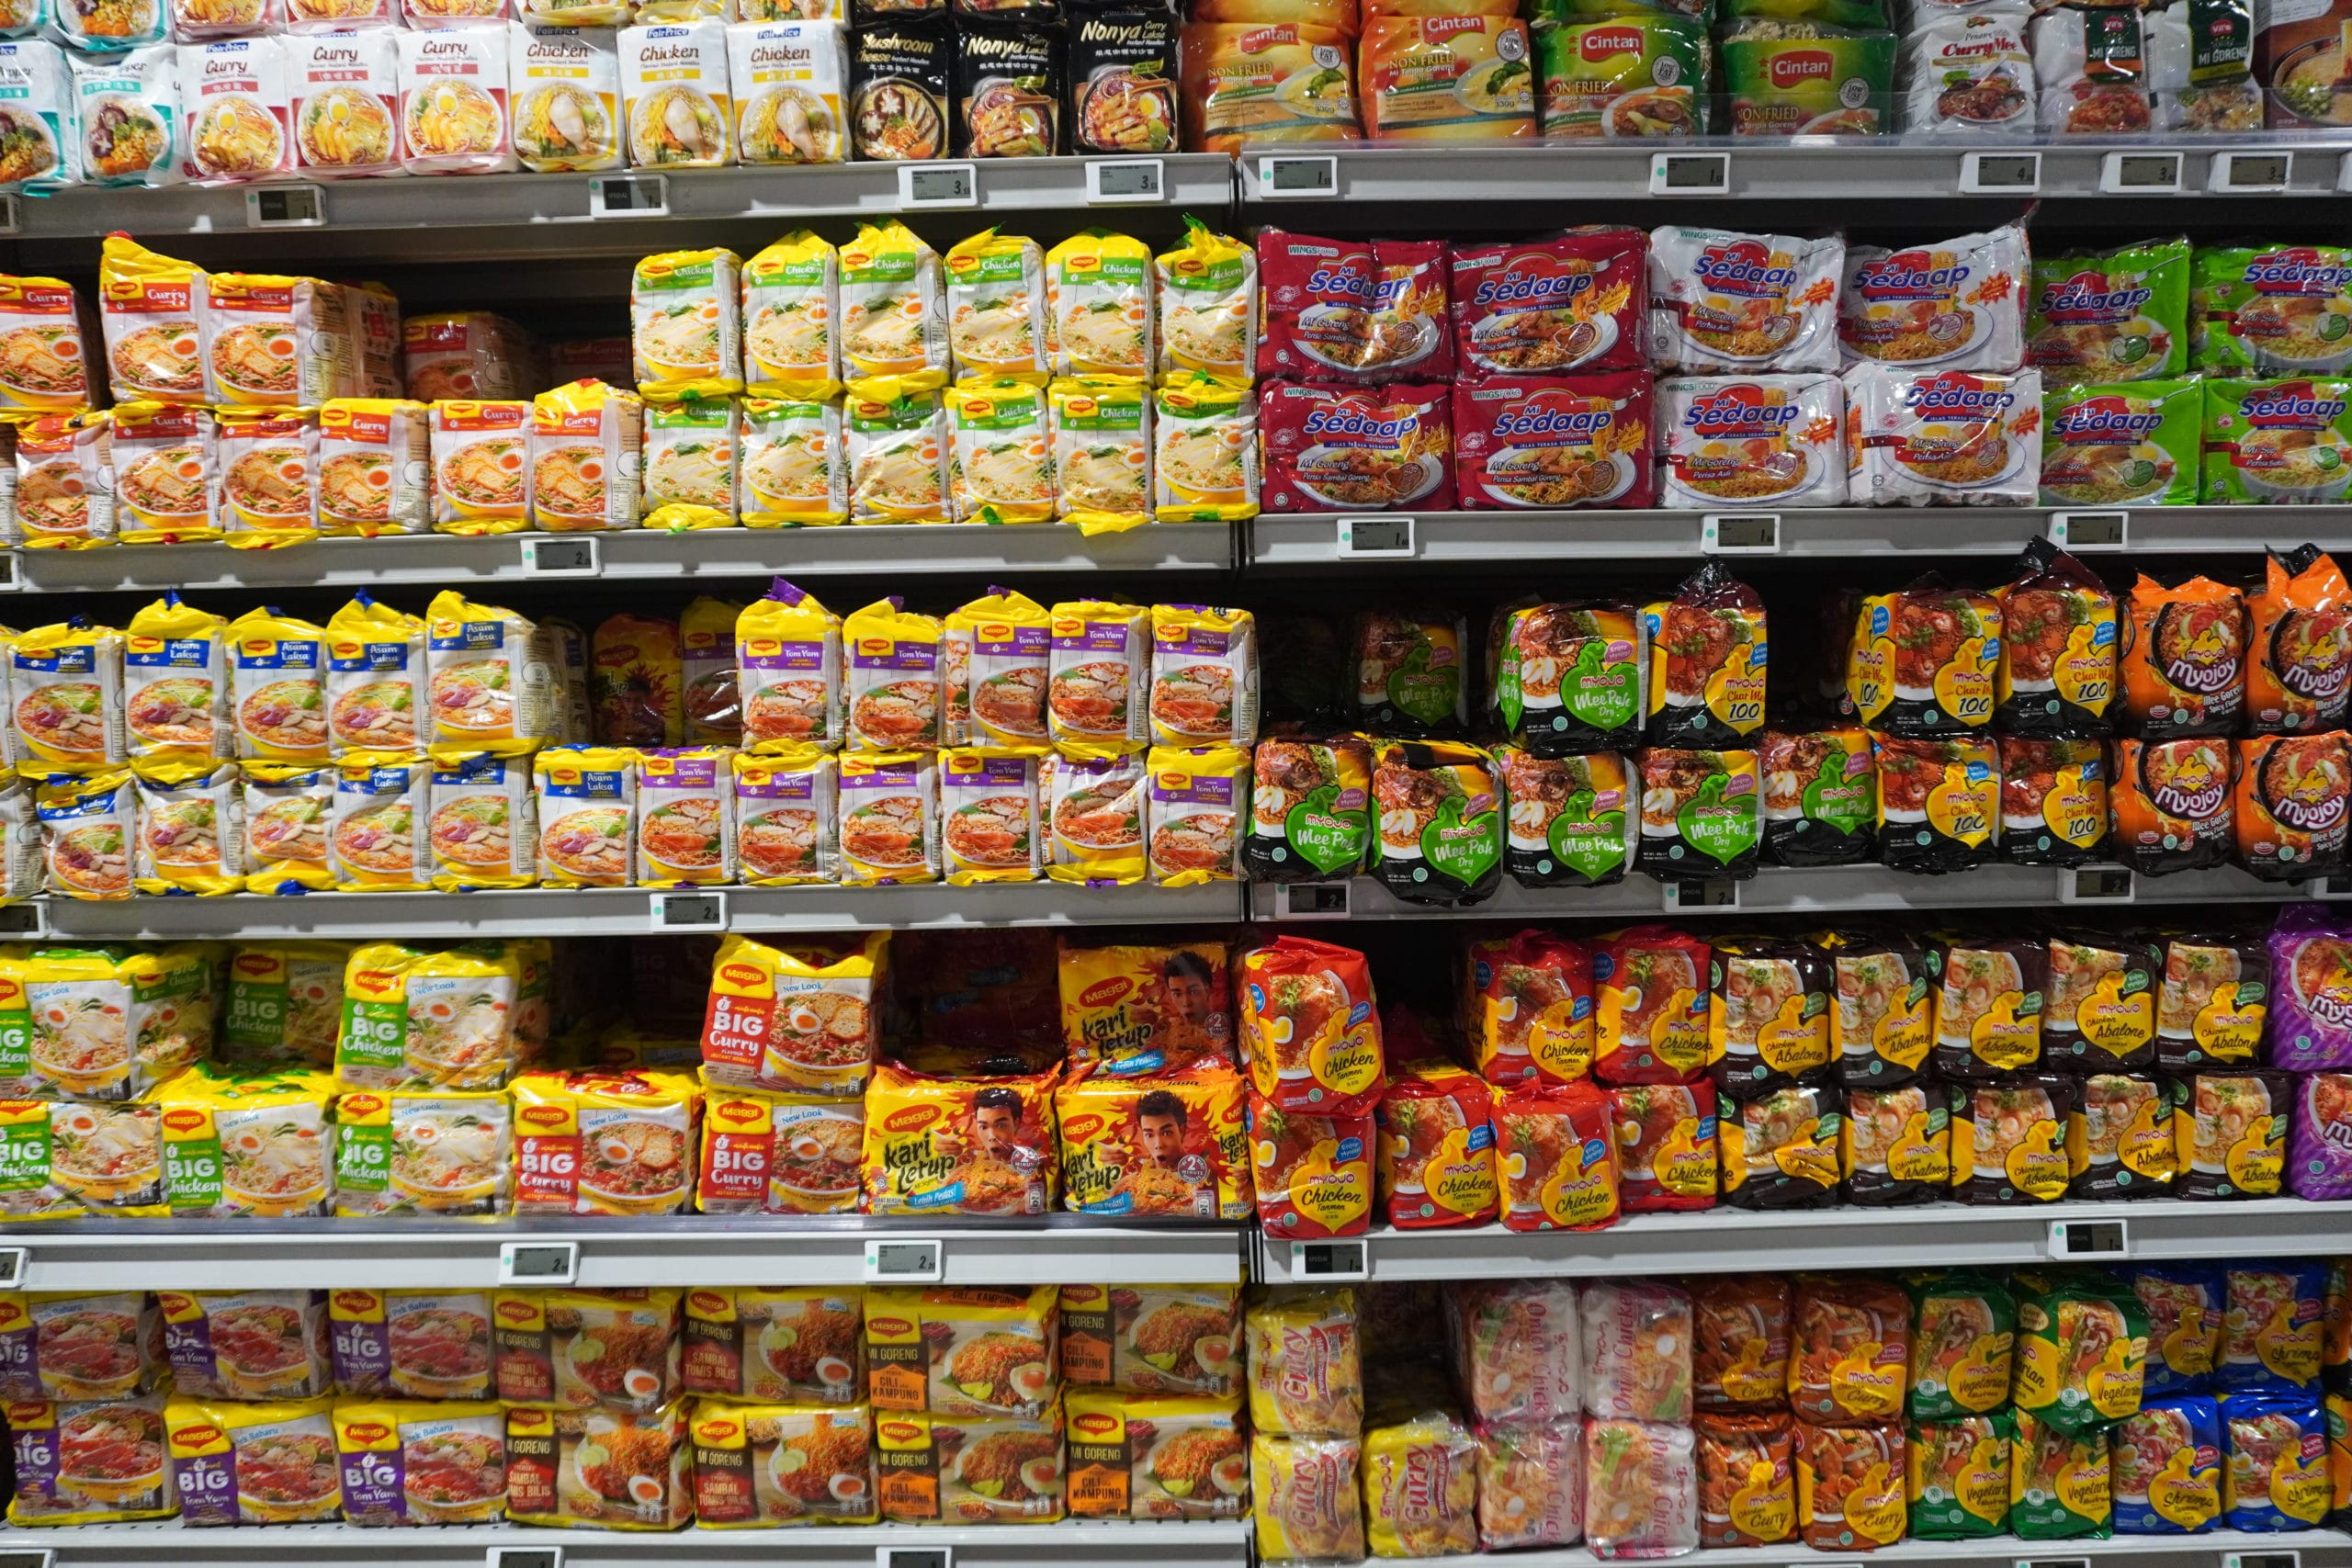 why are instant noodles seen as unhealthy? can we change that?